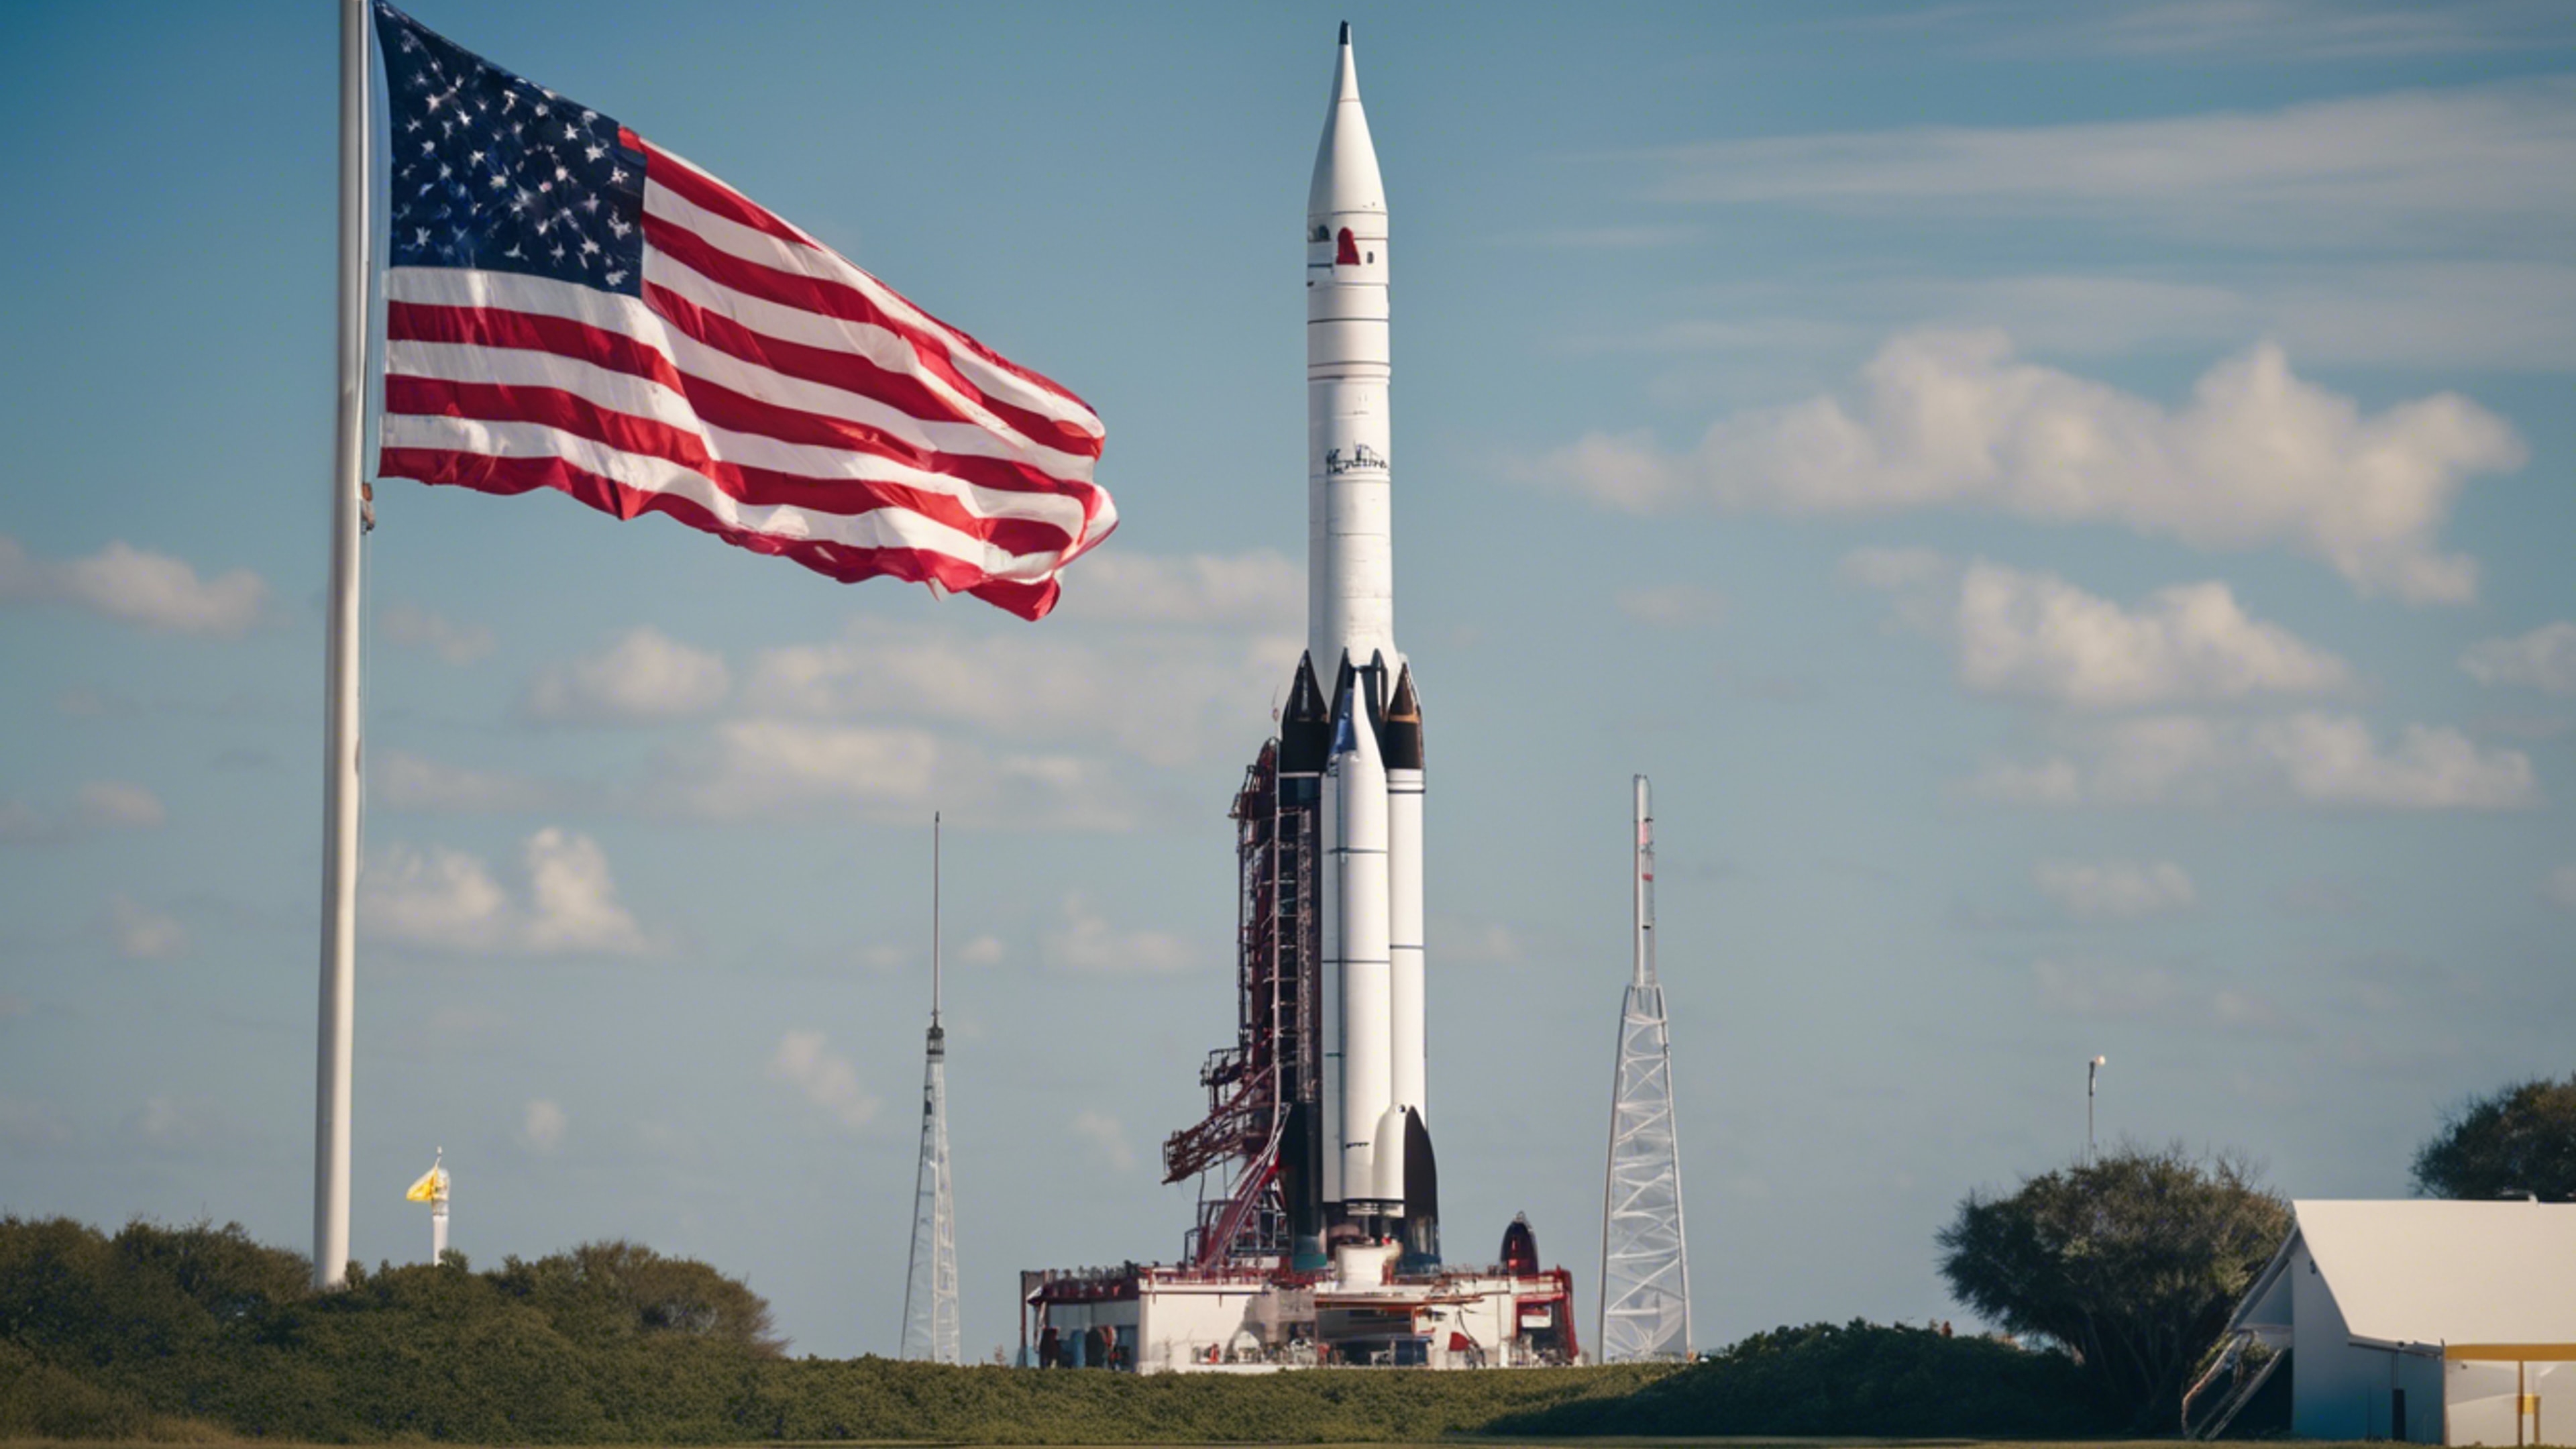 A historic rocket display at Cape Canaveral, with a clear blue sky and the American flag waving in the background. Wallpaper[7e3199d5ab33424fb953]